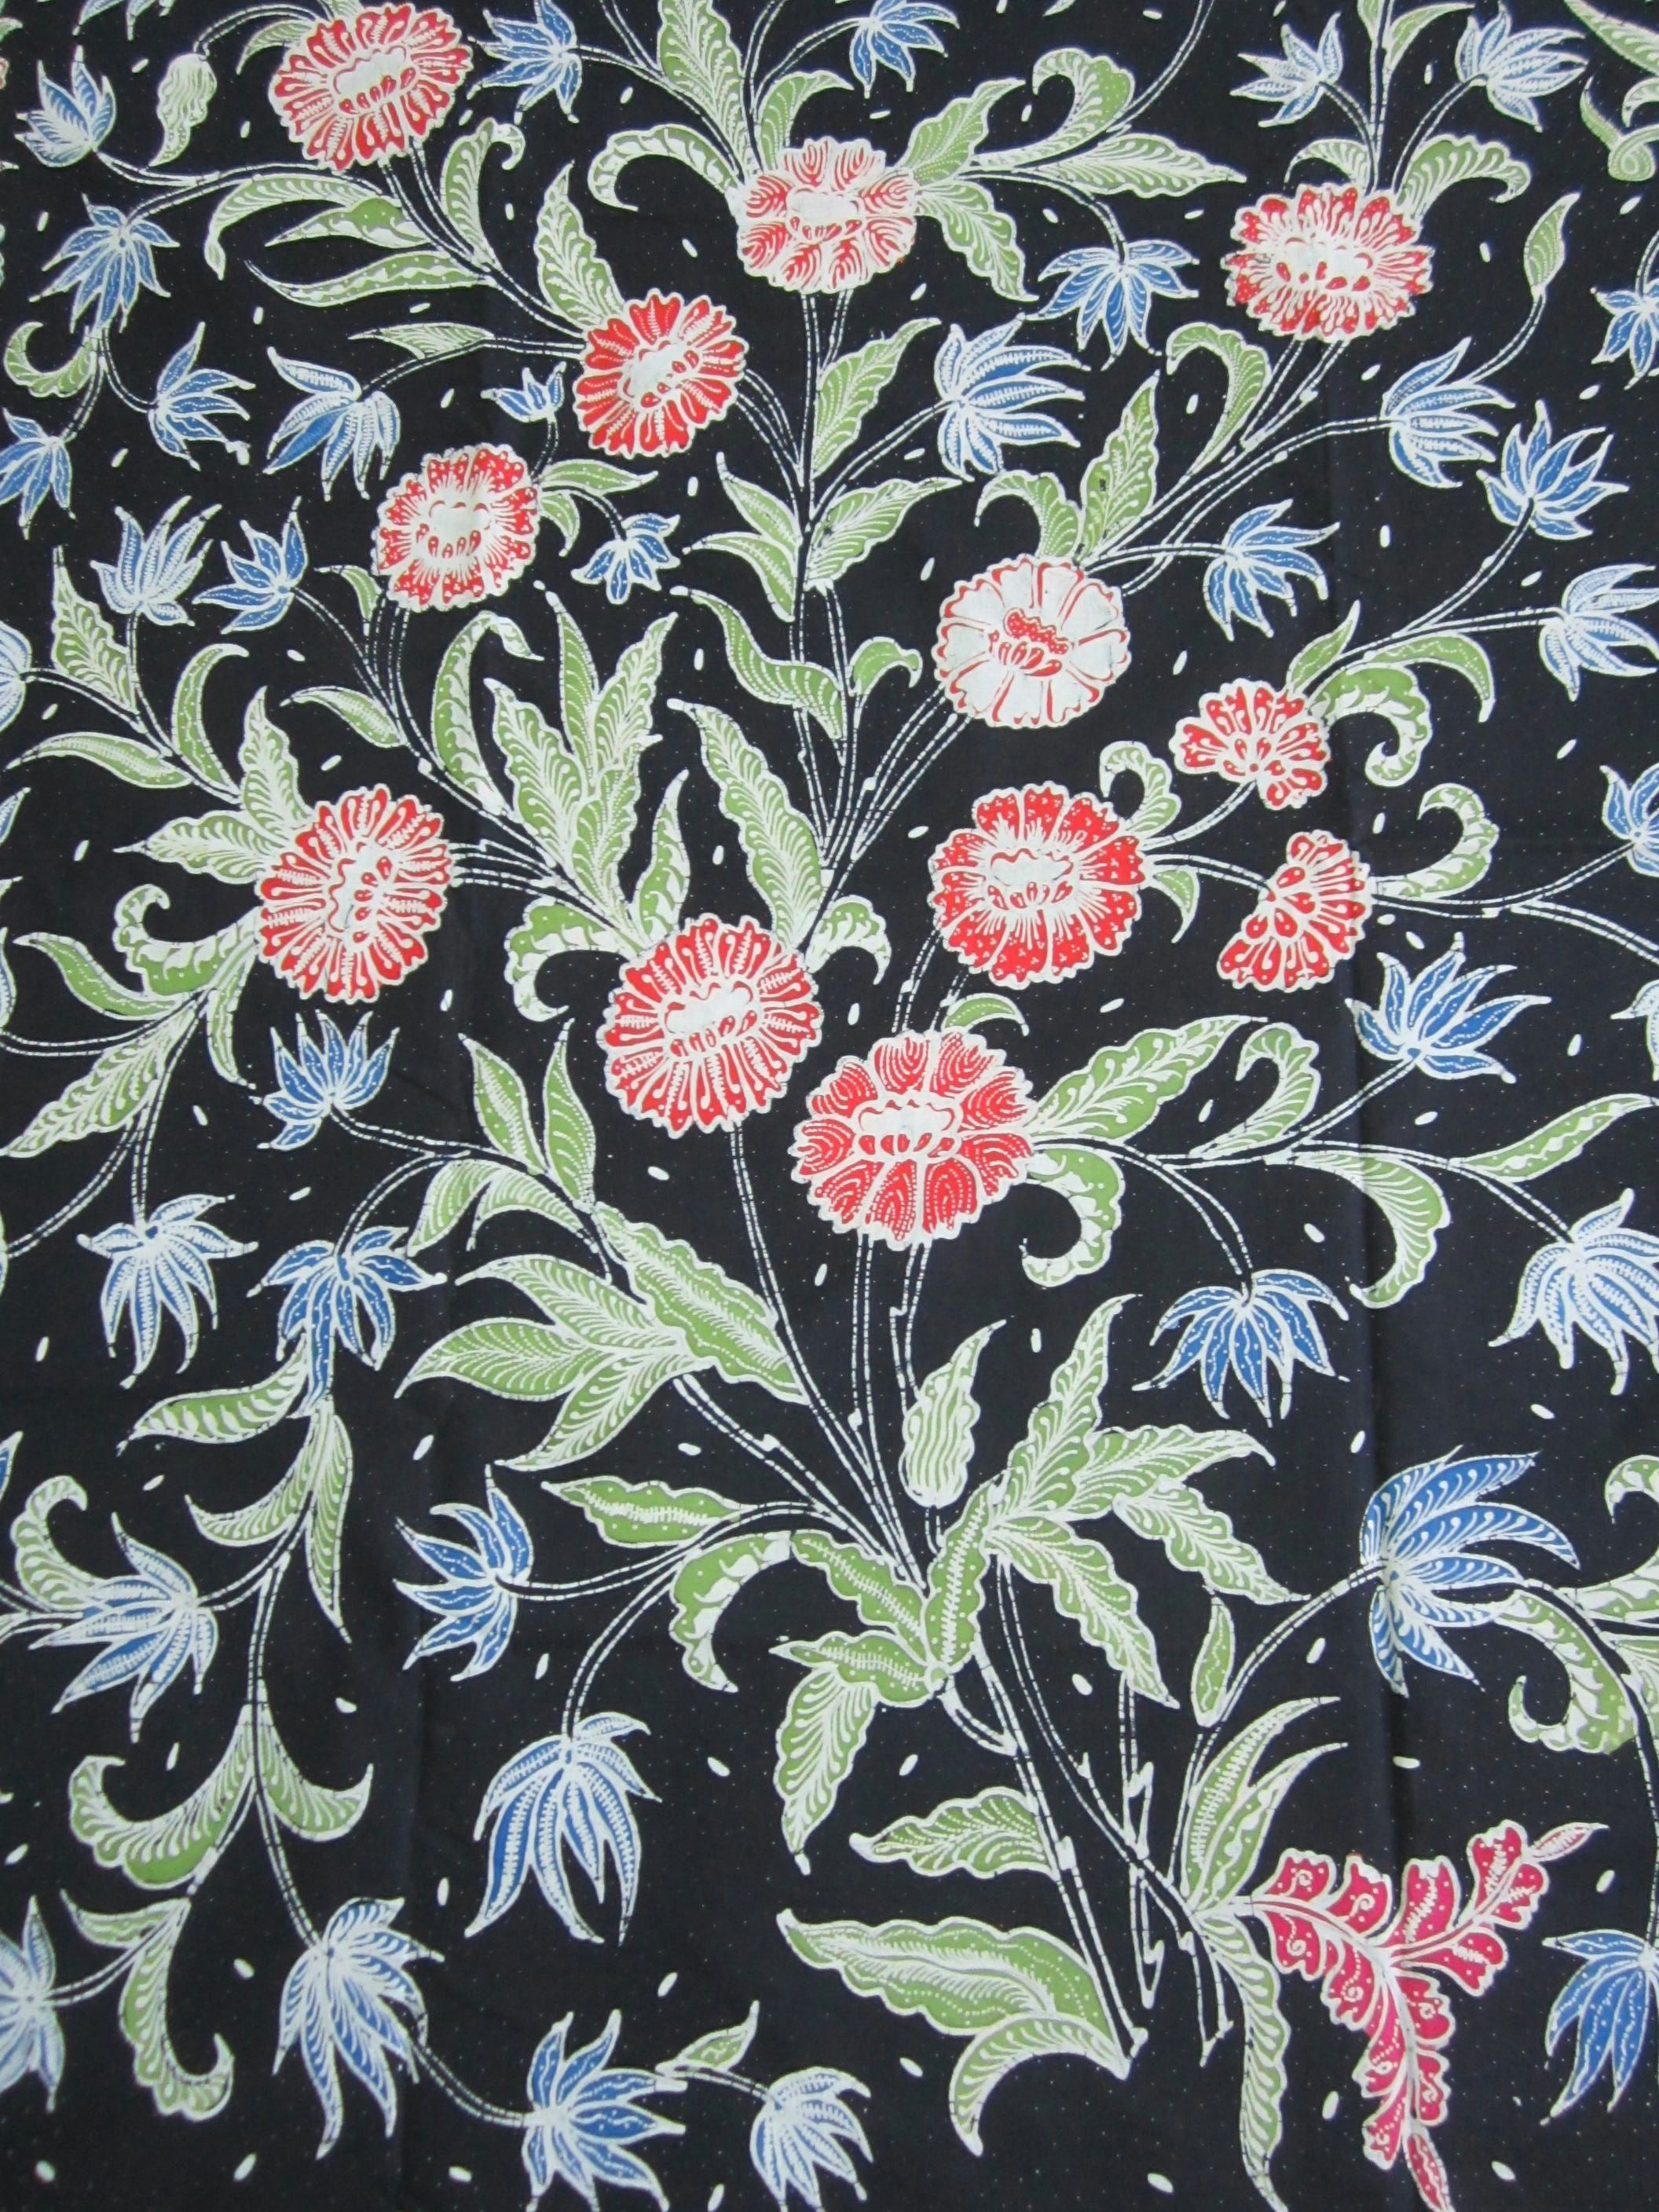 Drawing Flowers Java Floral Tulis Batik On Navy Blue Background From Java Indonesia